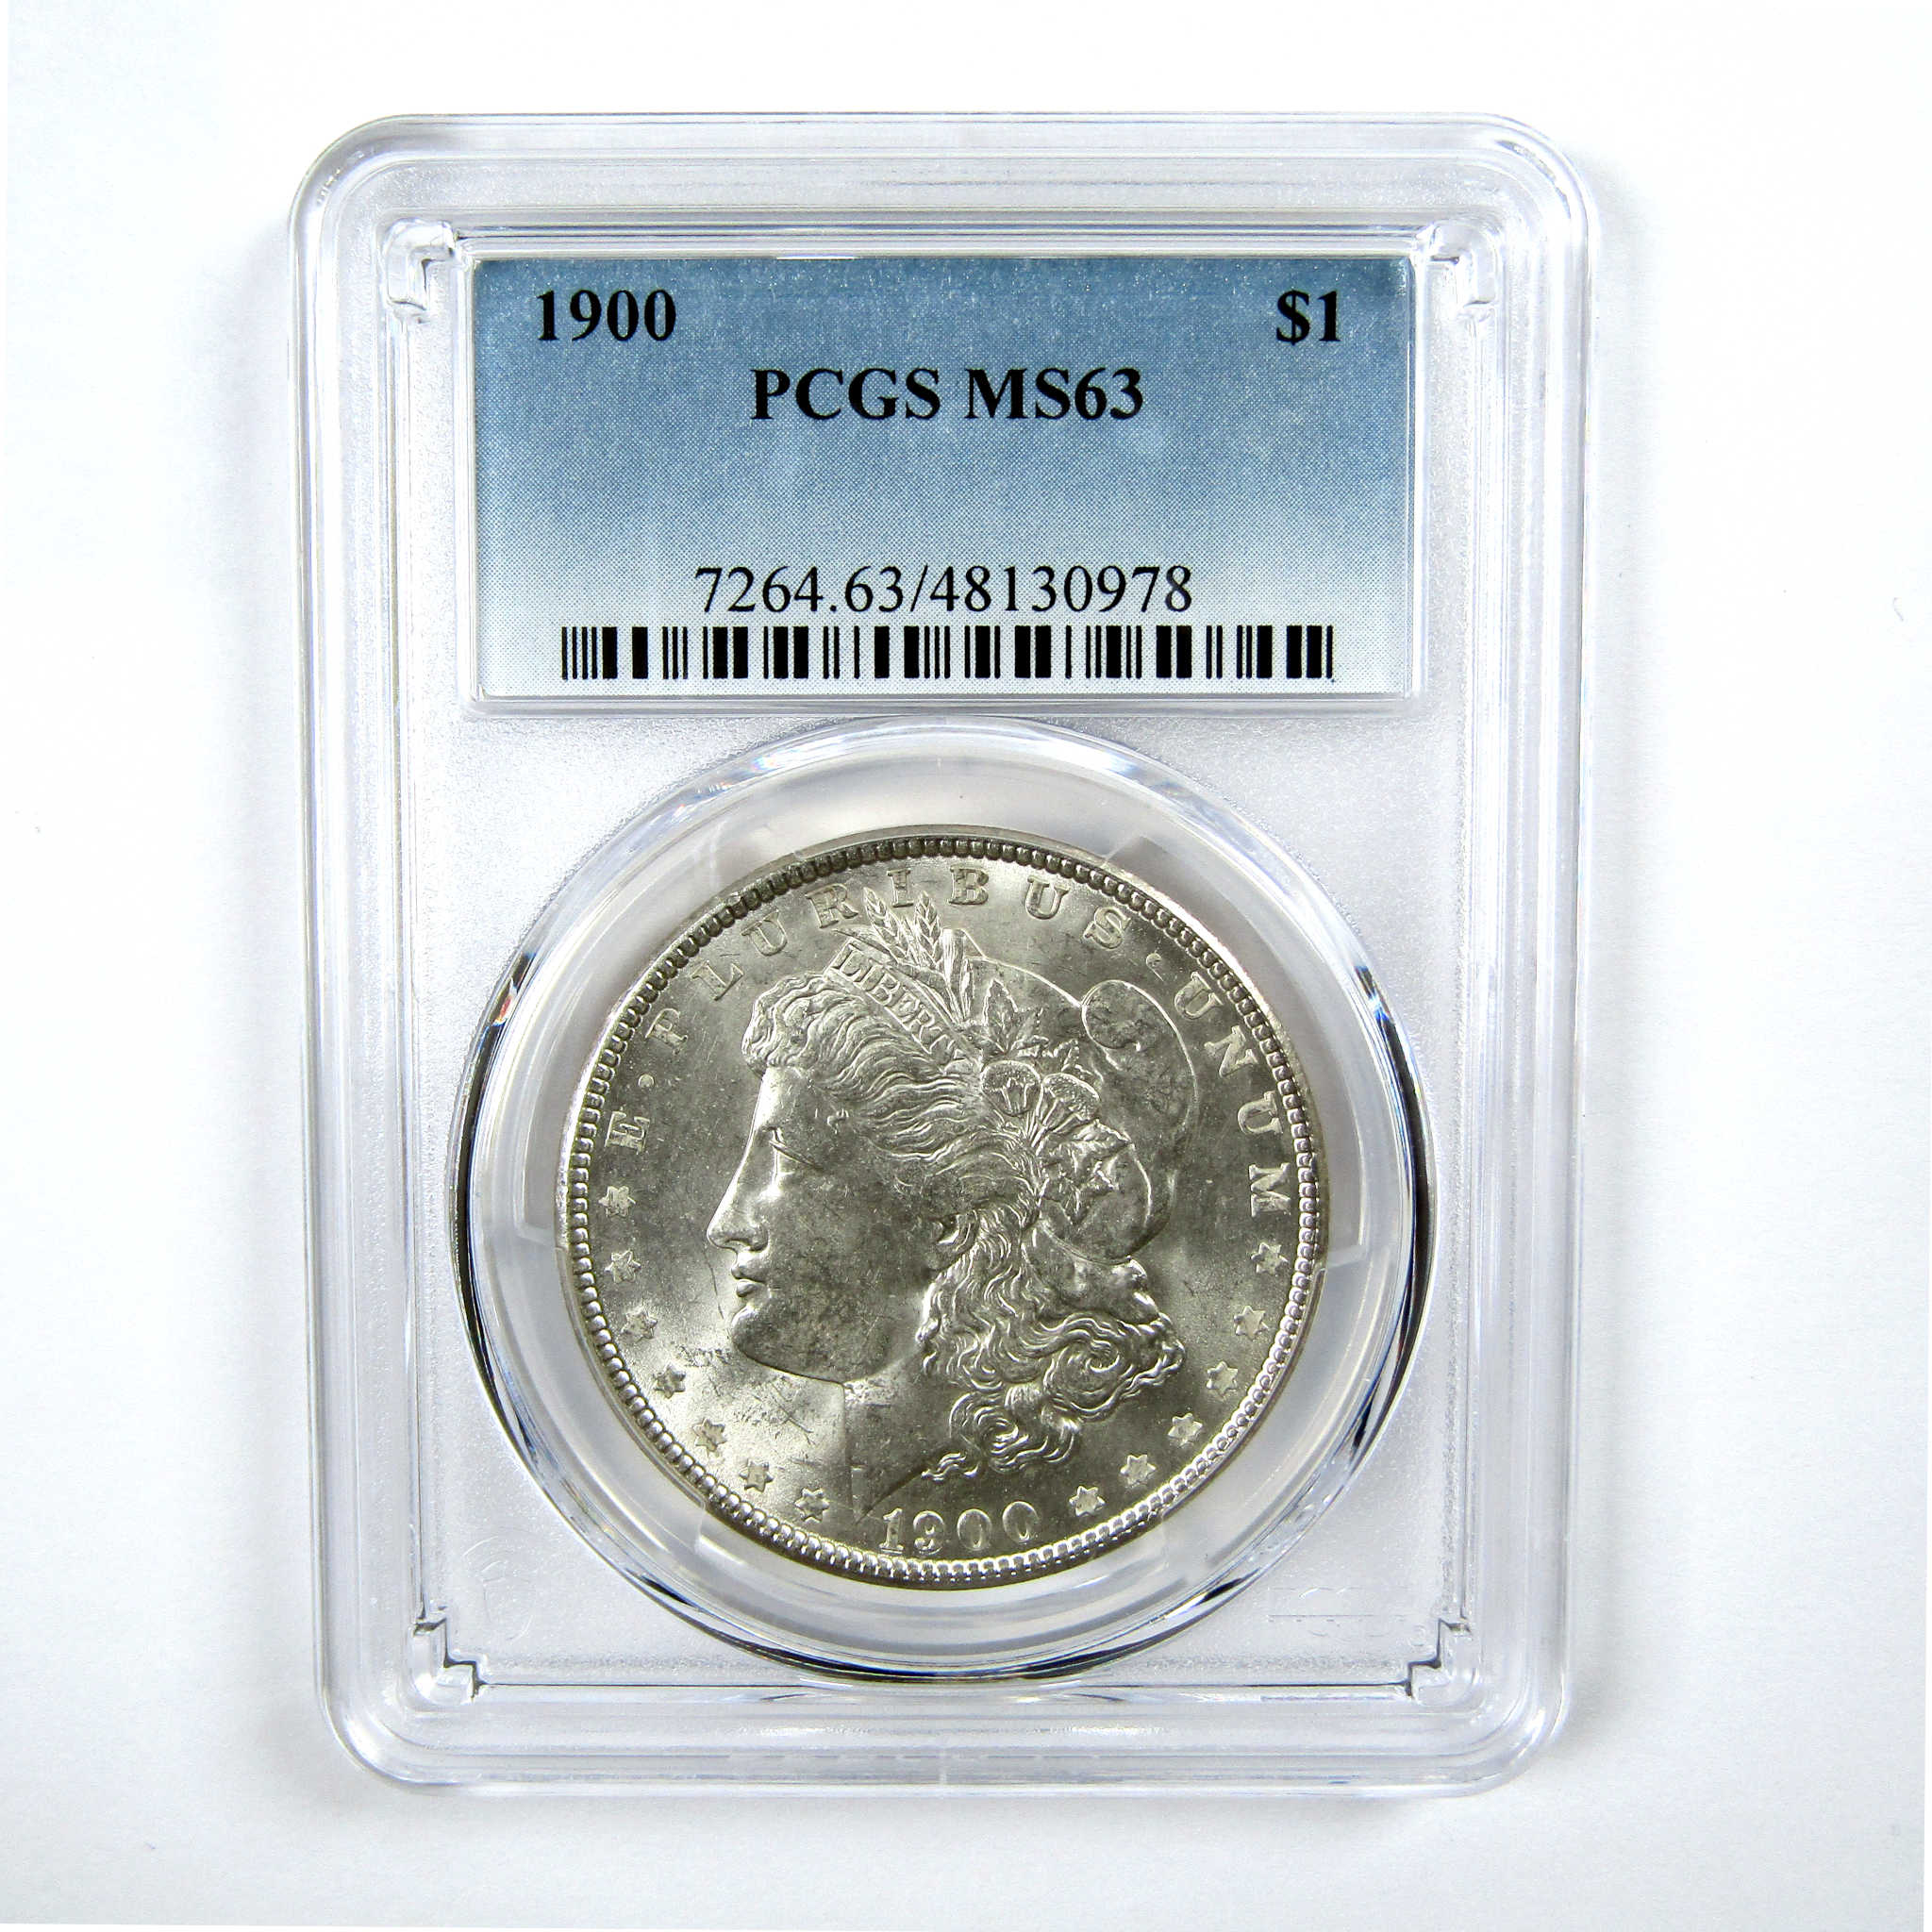 1900 Morgan Dollar MS 63 PCGS Silver $1 Uncirculated Coin SKU:I13787 - Morgan coin - Morgan silver dollar - Morgan silver dollar for sale - Profile Coins &amp; Collectibles